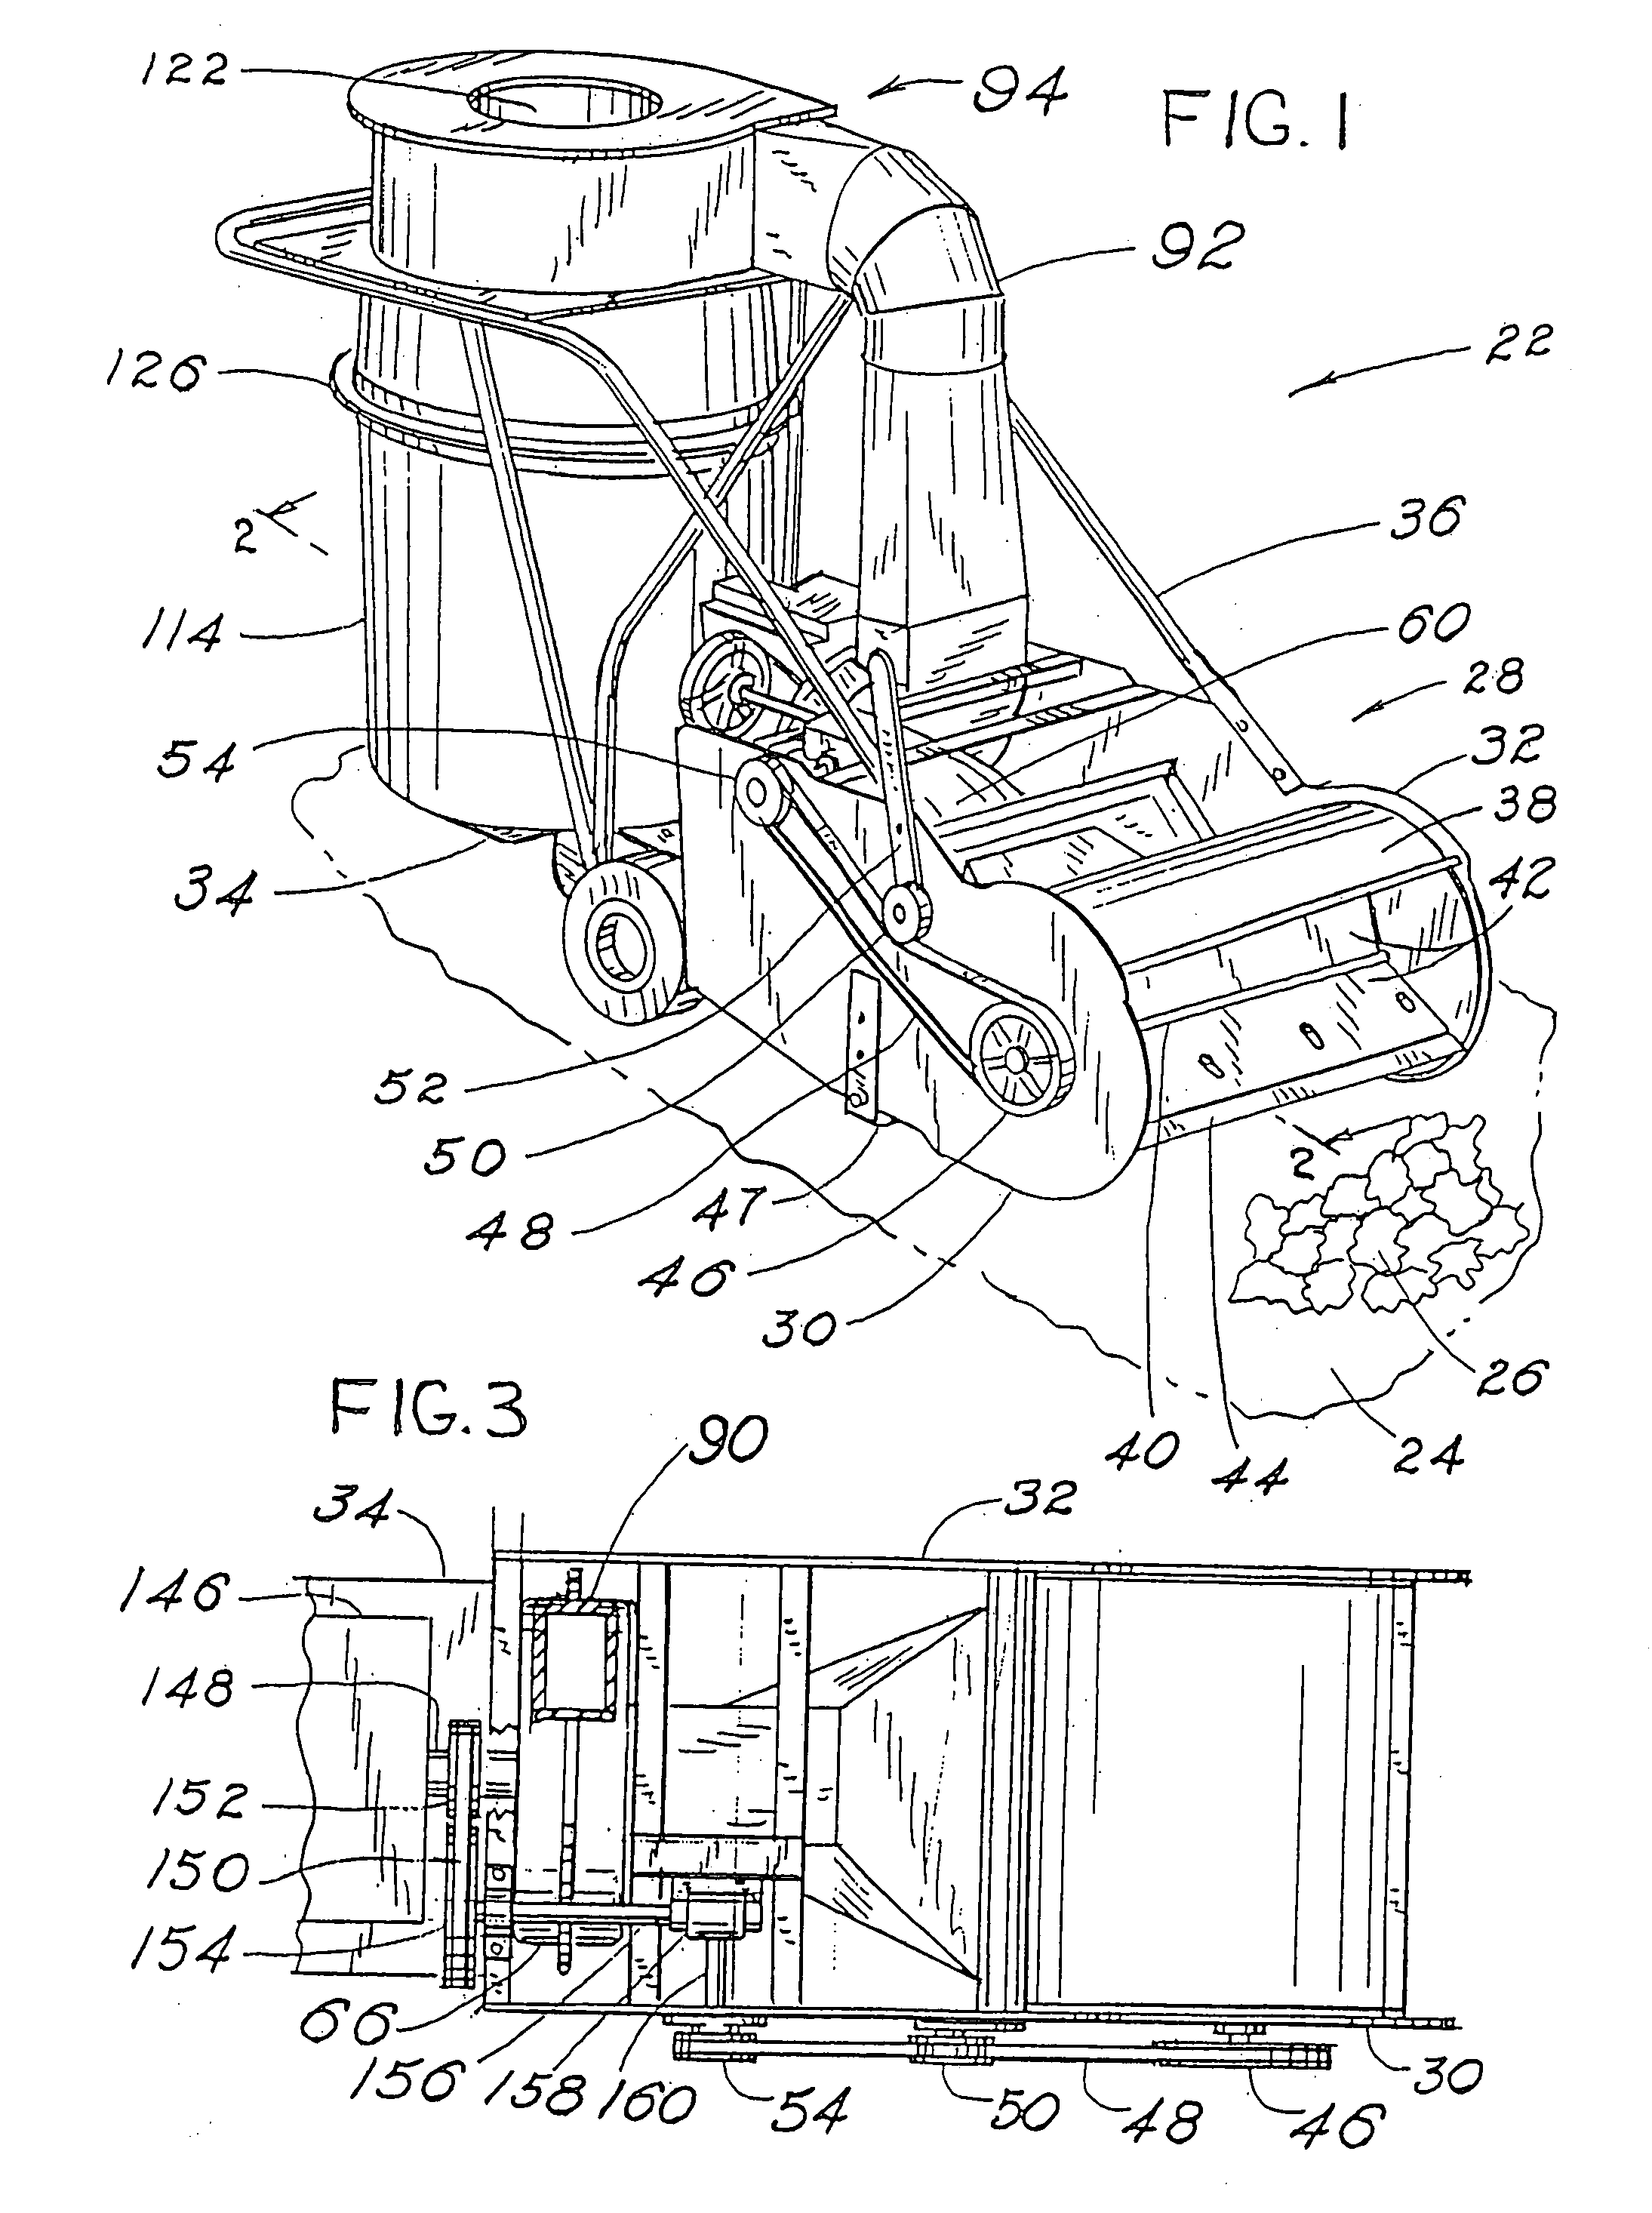 Collector and separator apparatus for lawn and garden